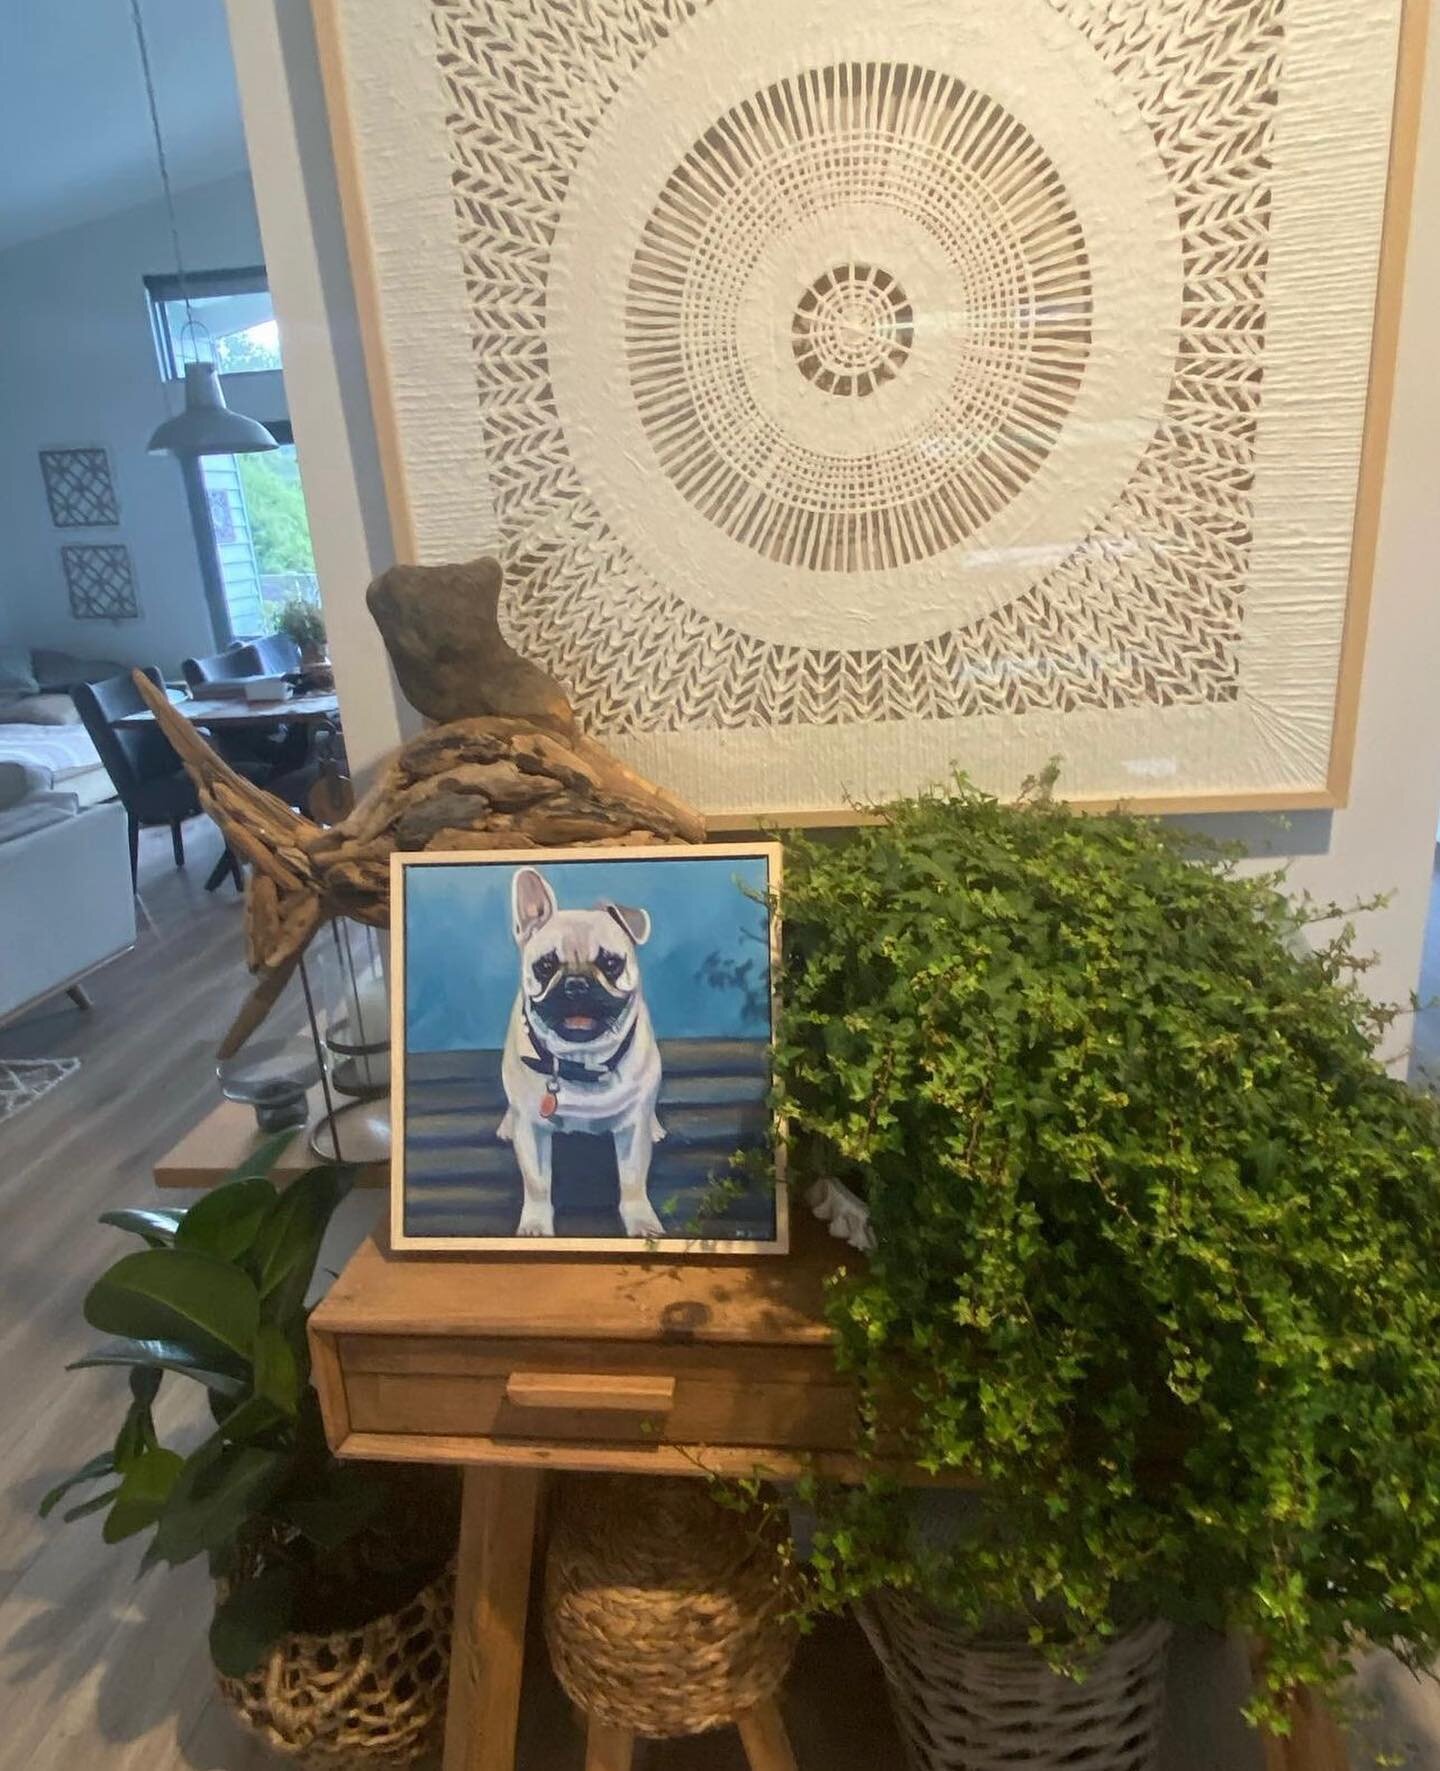 I just love love love seeing where my paintings end up in their forever homes. Makes it feel very special. Look at the beautiful space this artwork gets to live in! #petportrait #chloemazzart #chloemazzitelliart